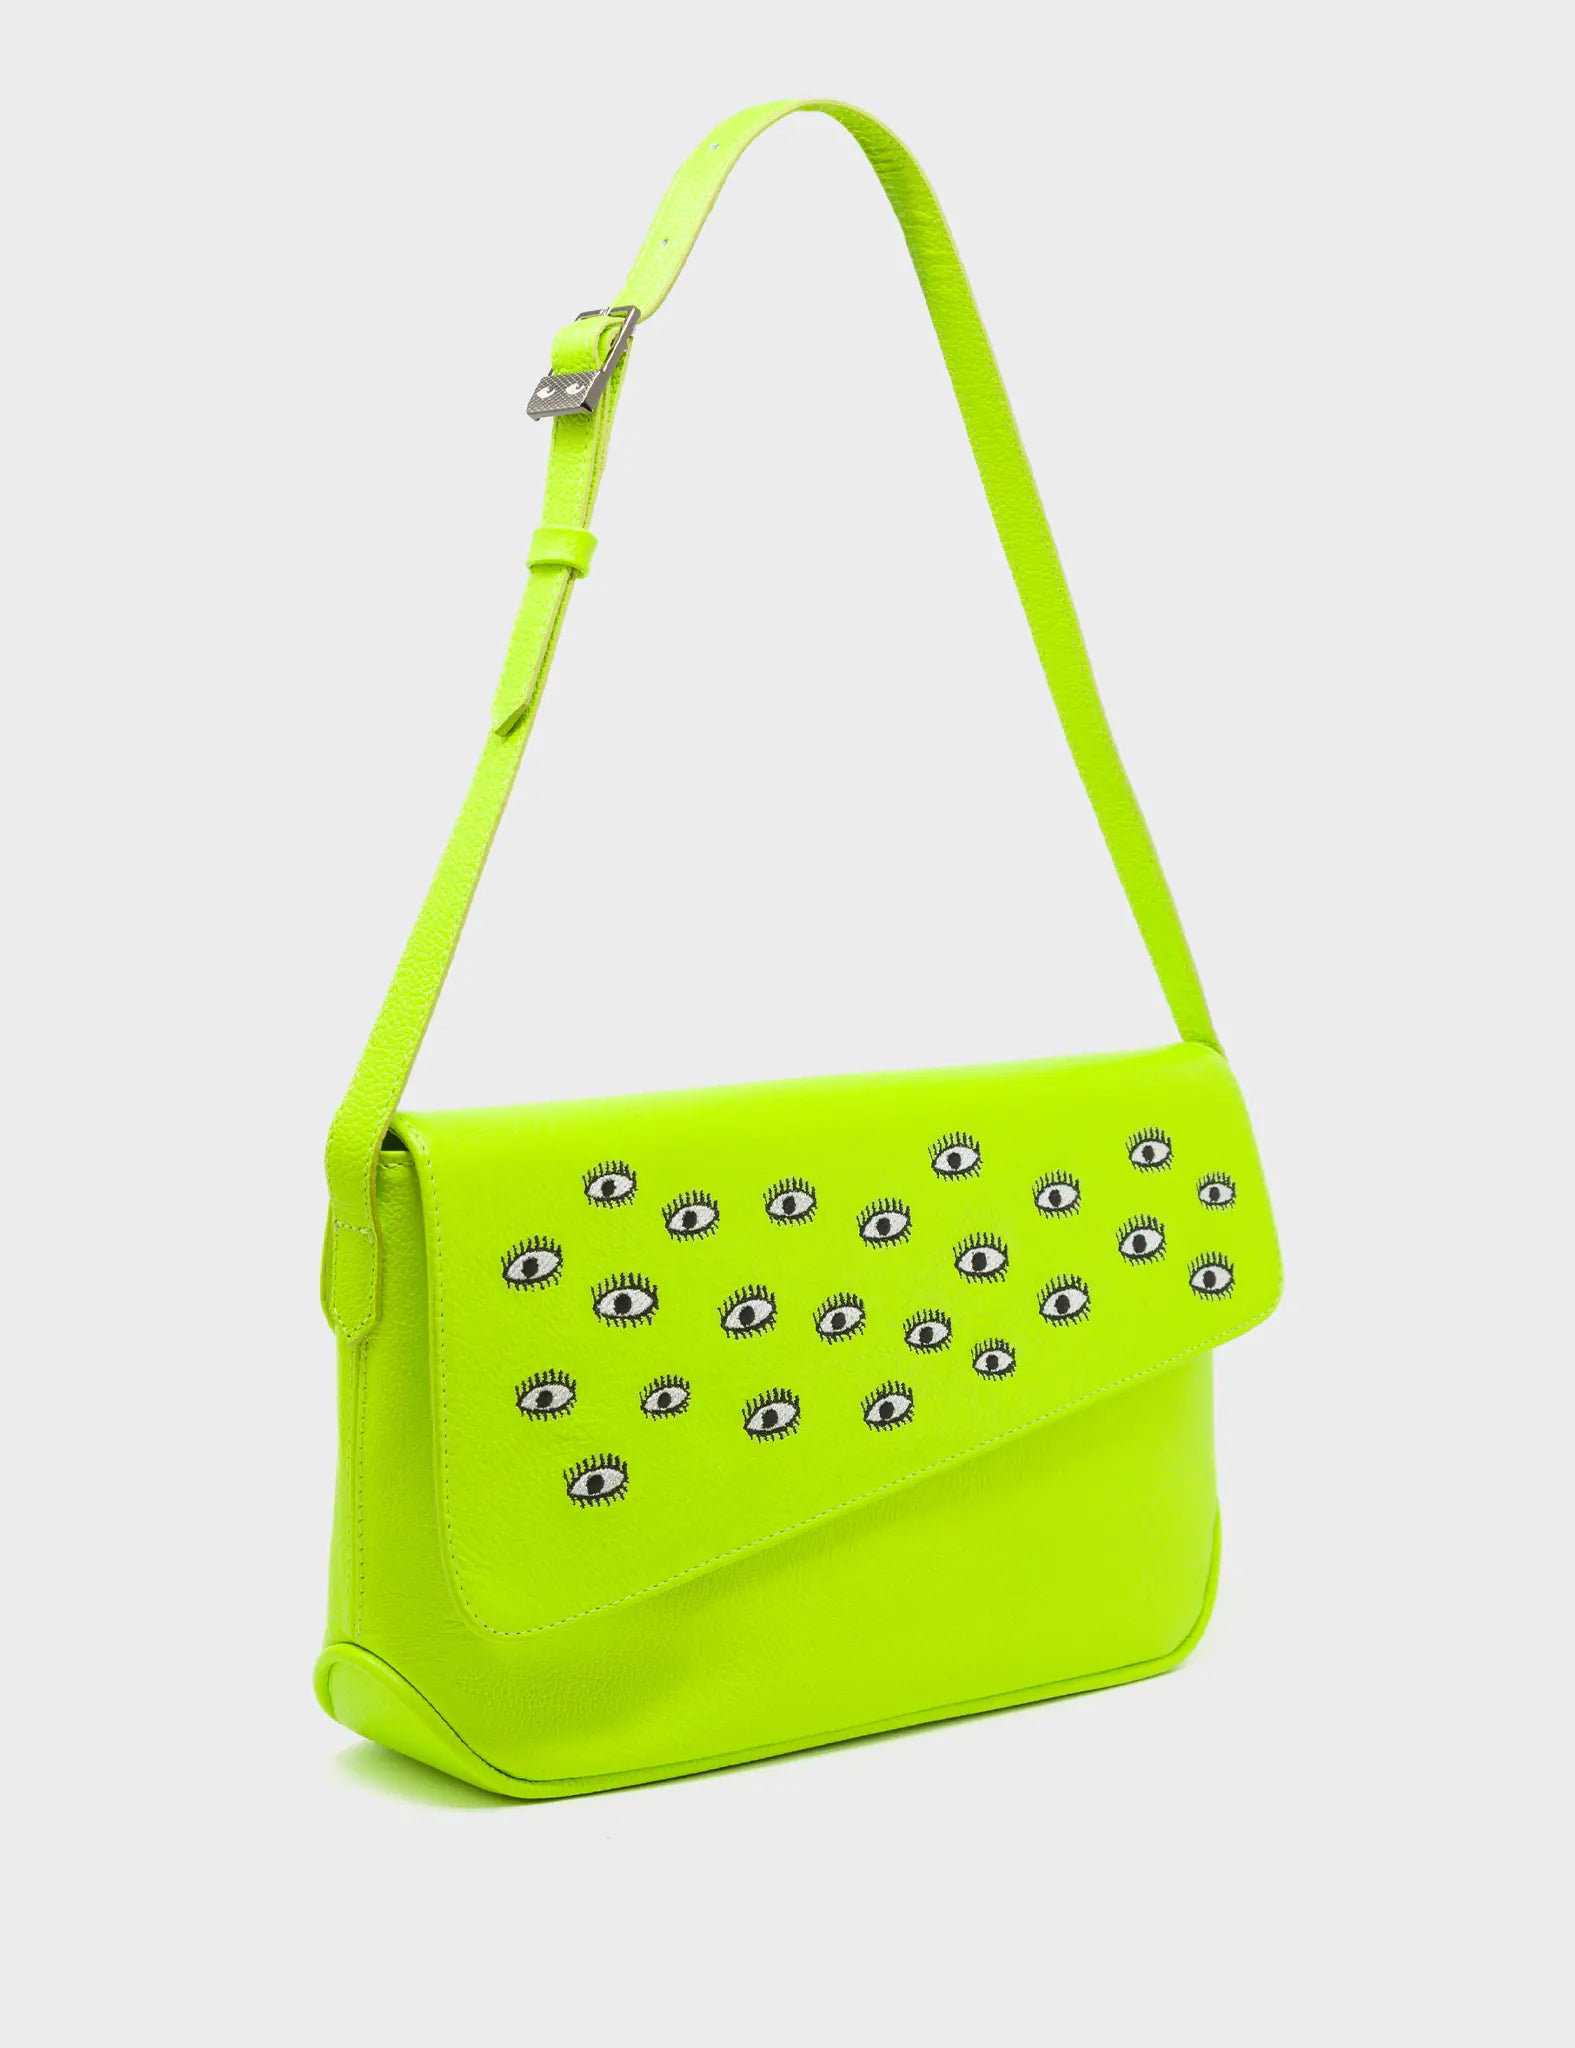 Bruno Medium Neon Yellow Leather Shoulder Bag - All Over Eyes Embroidery - Main View